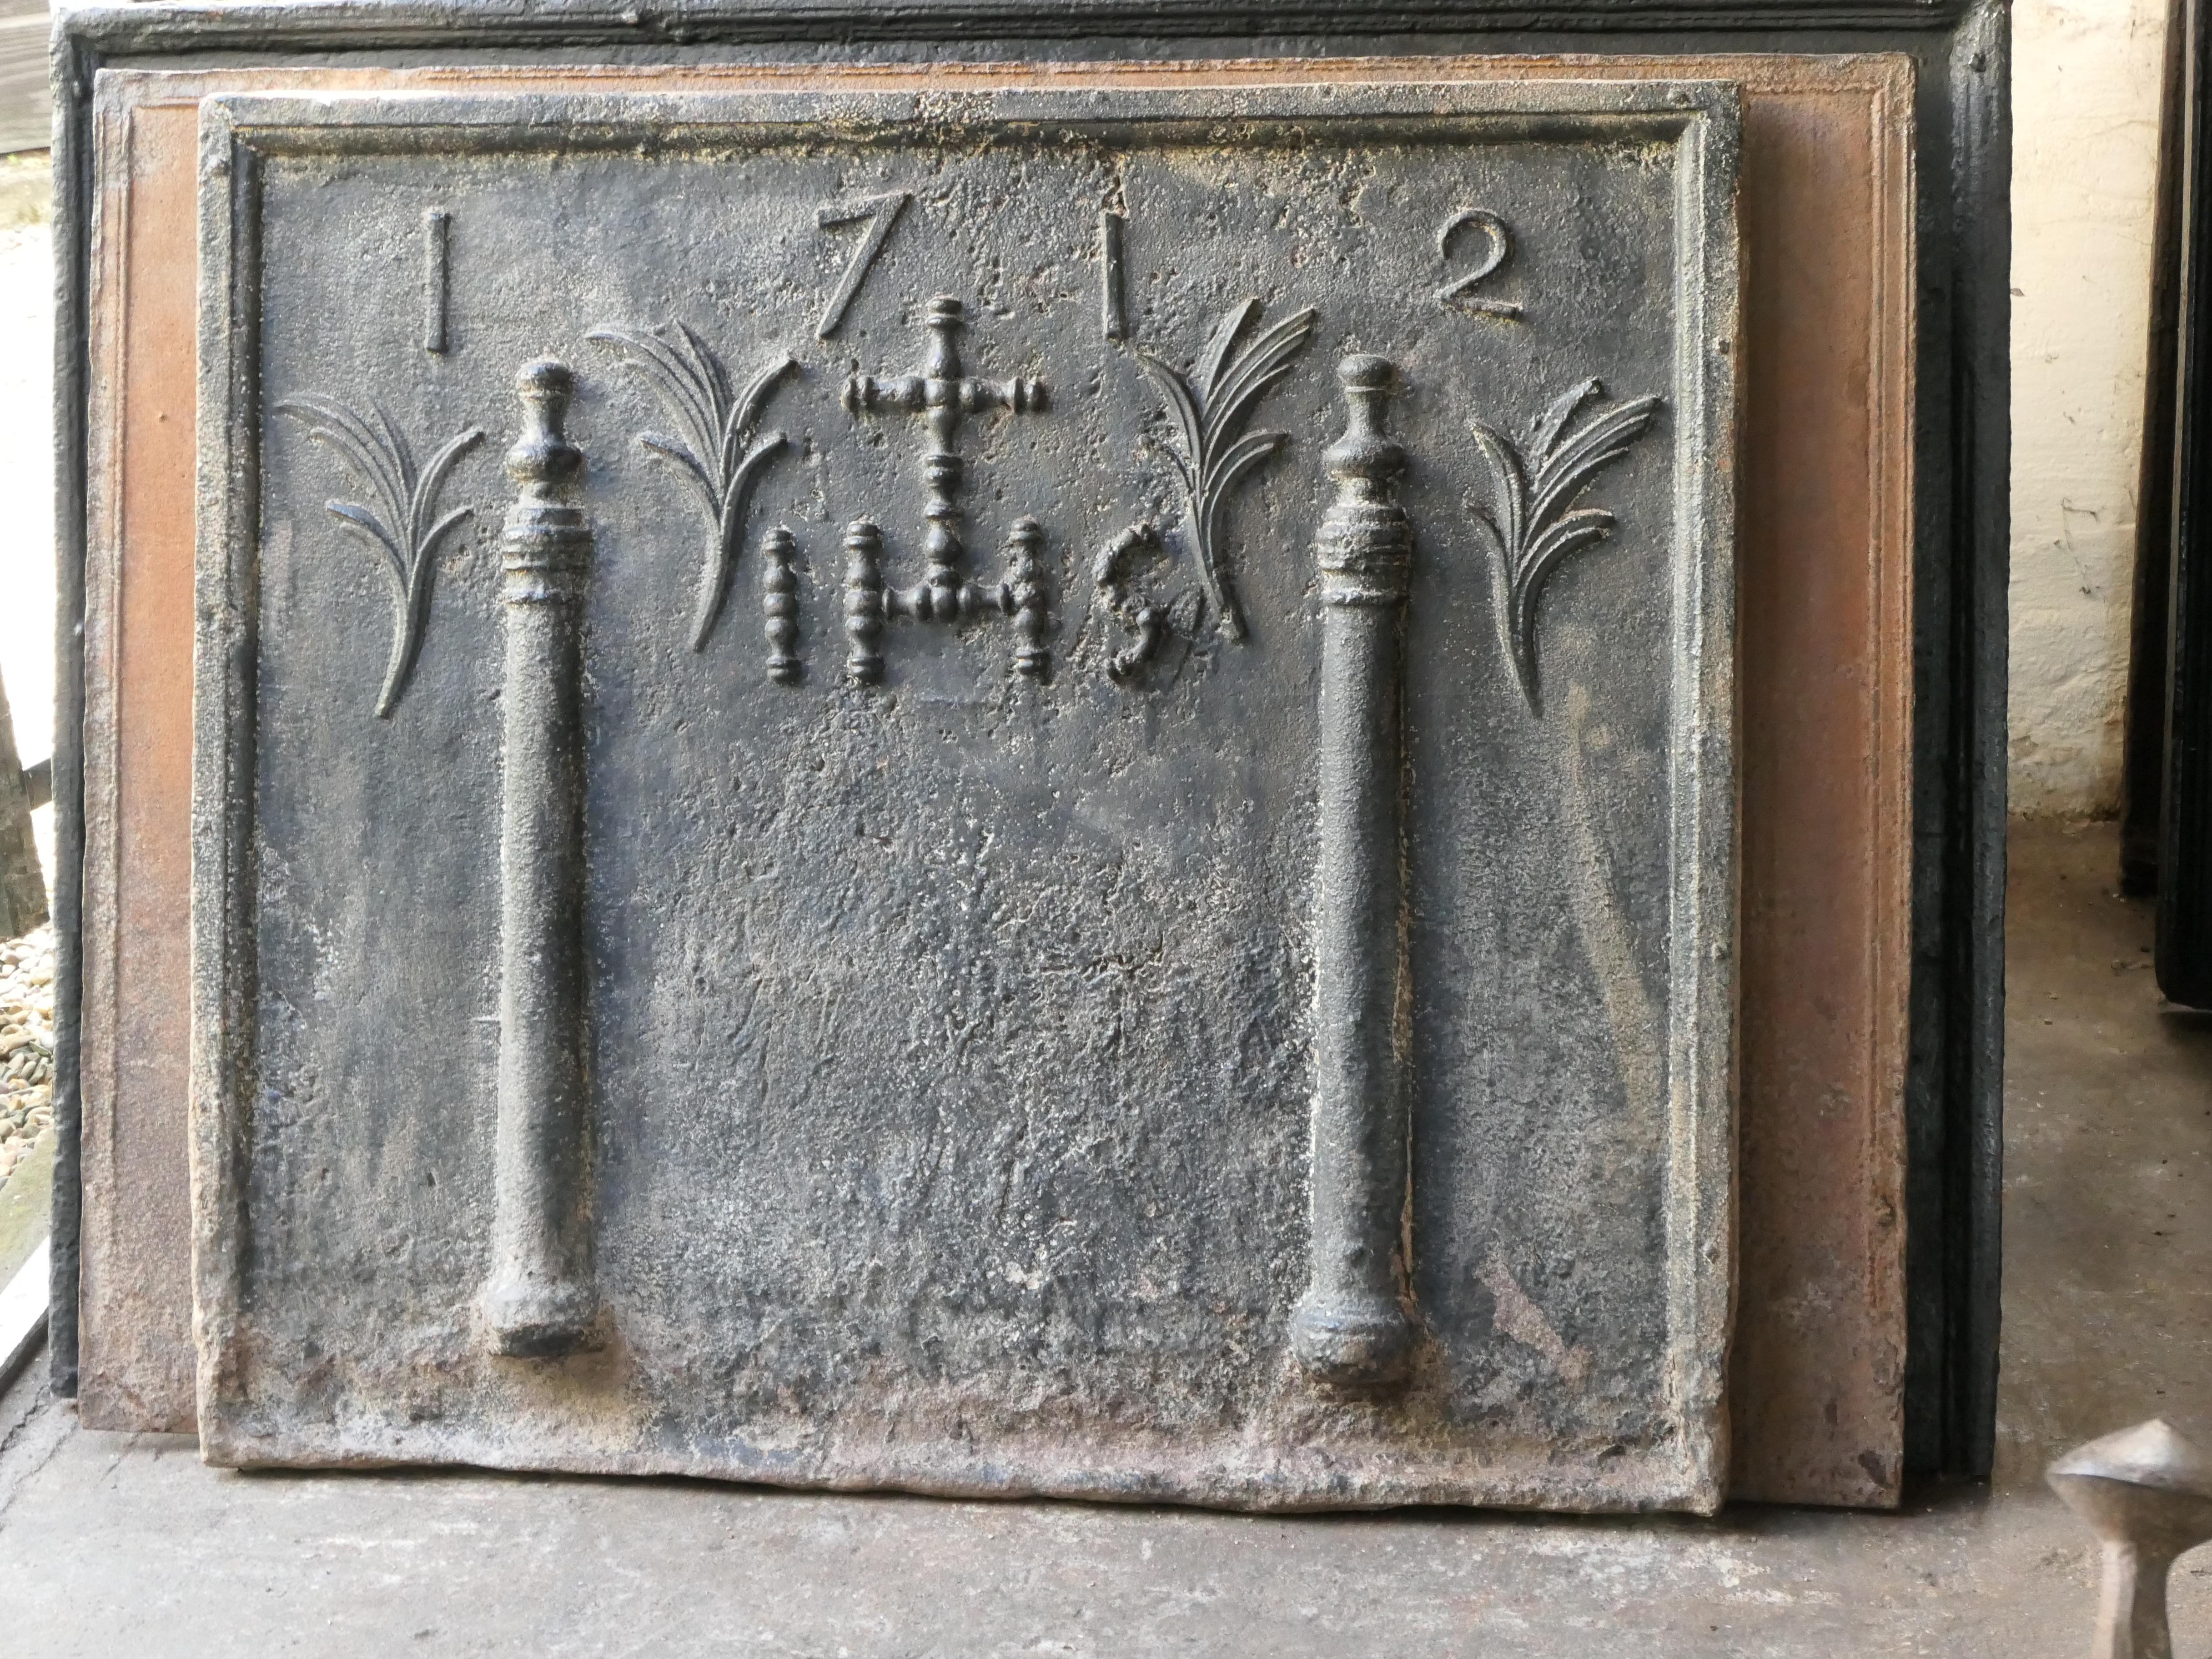 18th century French Louis XIV fireback with two pillars, a IHS monogram and the date of production 1712.

The monogram IHS stands for Iesus Hominum Salvator (Jesus the Savior of Humanity) or In Hoc Signo (In this sign will you win). The pillars